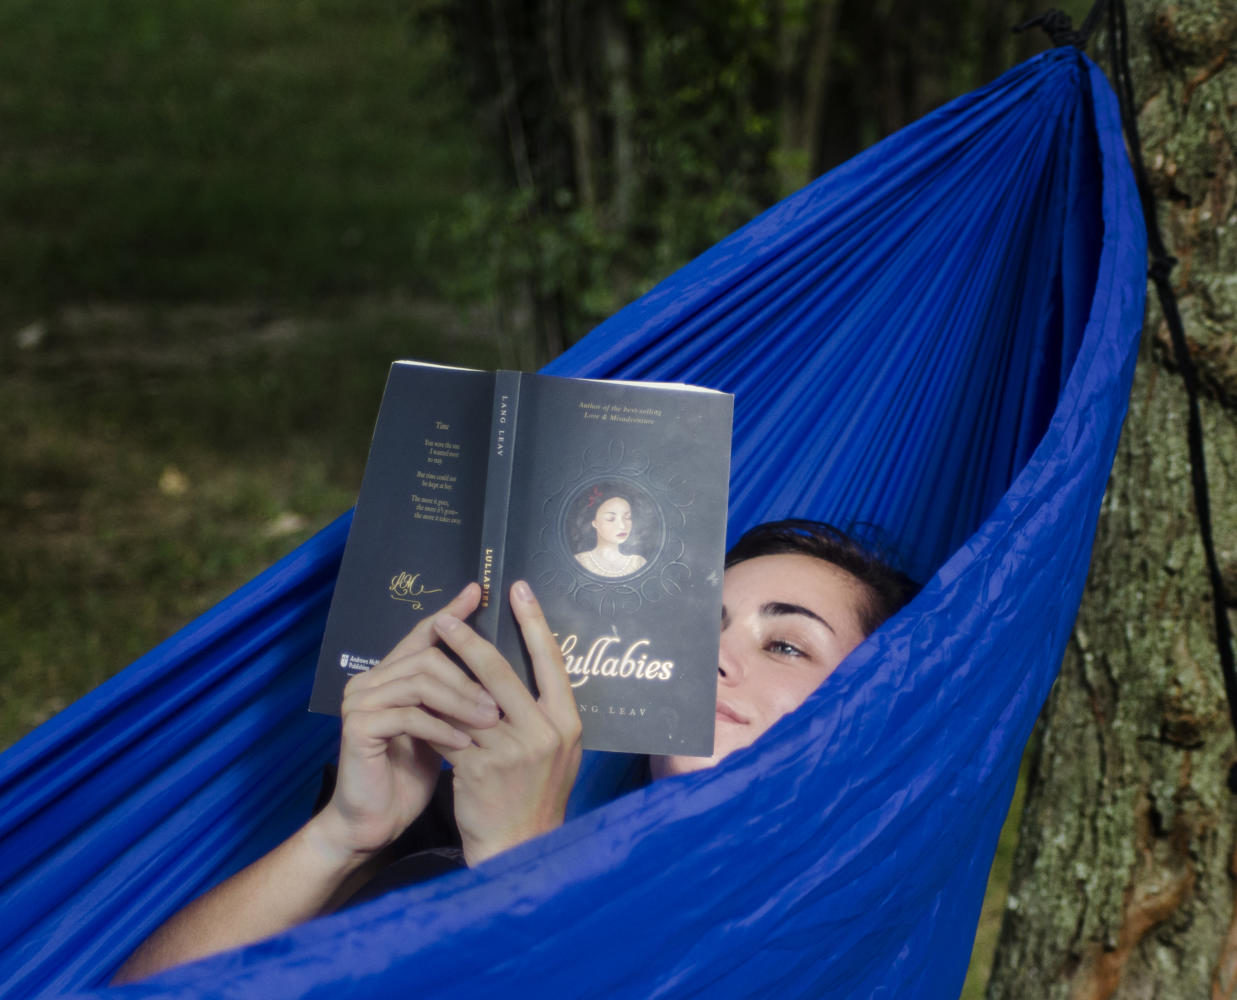 Taylor Goldtrap, a junior from Kankakee majoring in forestry, read a poetry book while relaxing in a hammock Tuesday, Aug. 22, 2017, at Thompson Point. I chose this spot because it was near my dorm building and the trees were positioned perfectly to connect my [hammock] attachments, Goldtrap said. I was reading the book Lullabies by Lang Leave because I was looking for inspiration to write again. (Dylan Nelson | @Dylannelson99)